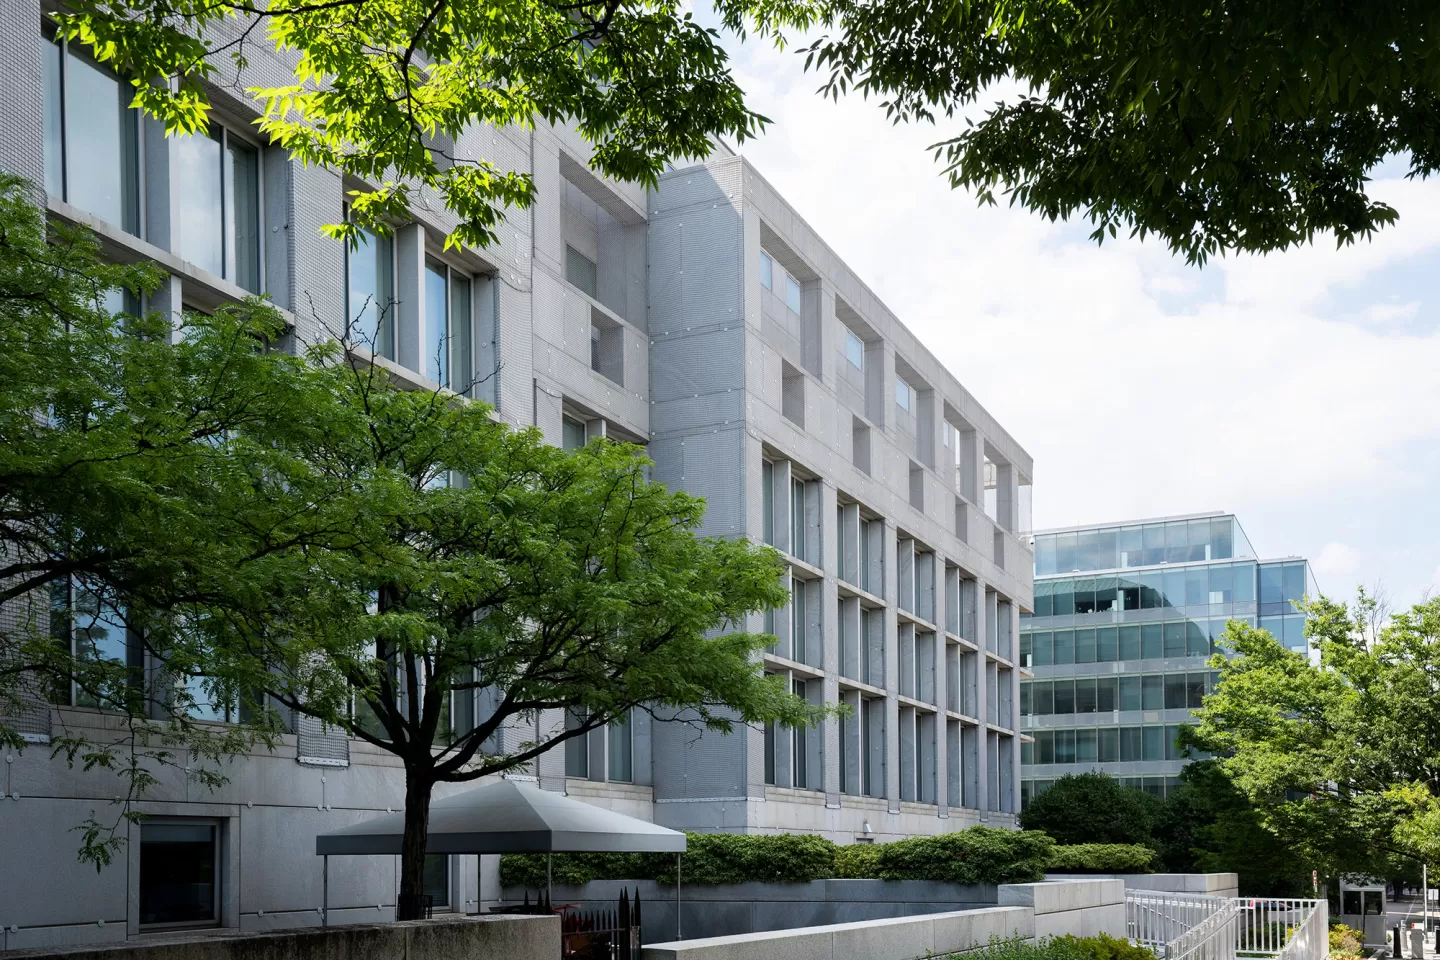 Exterior view of the Thurgood Marshall Federal Judiciary Building in Washington, DC.